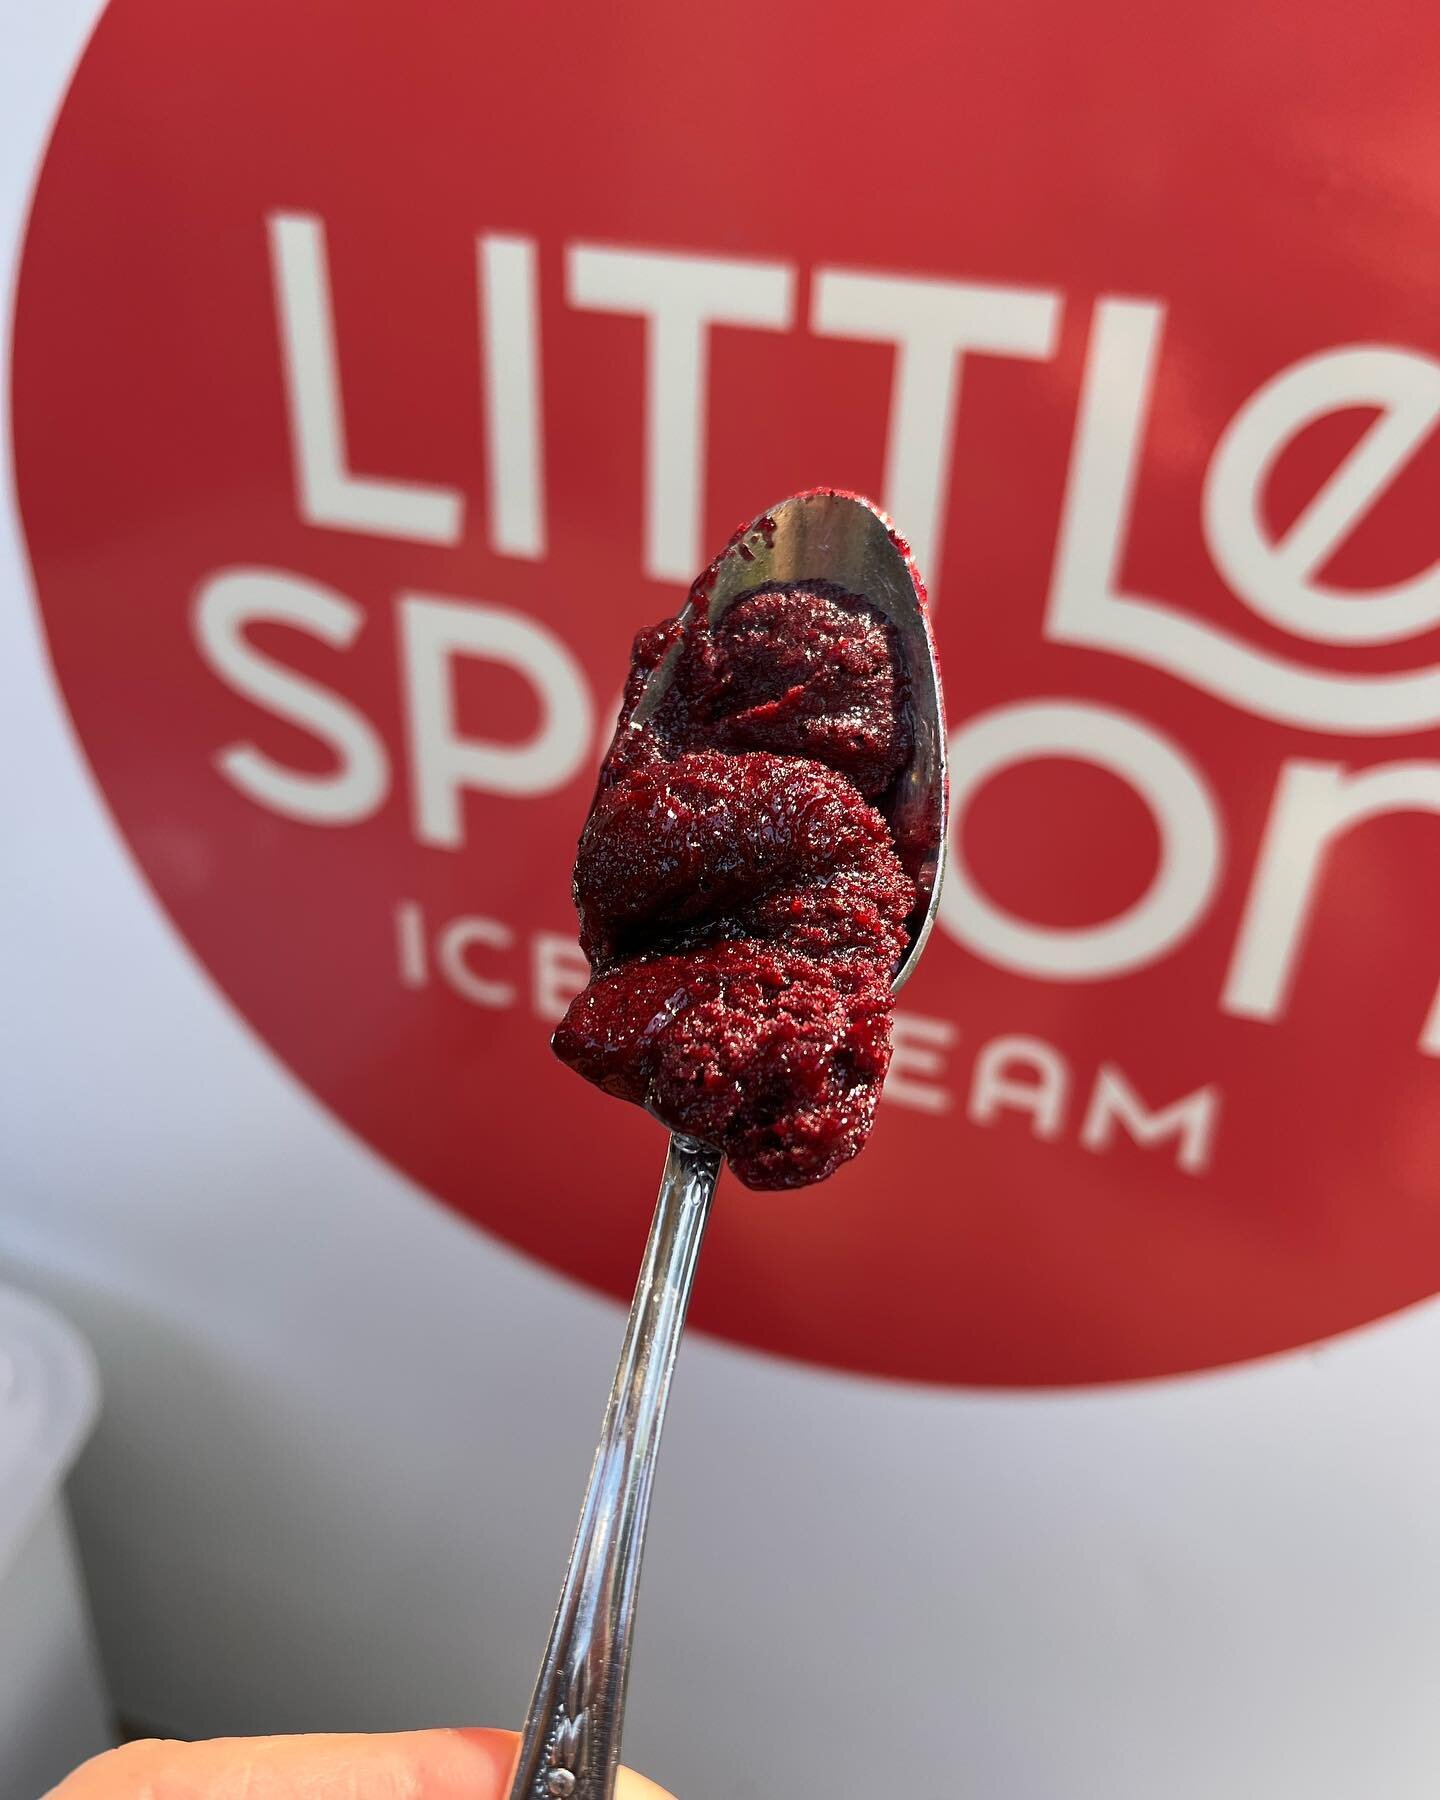 We will be open for scoops and pints today 1-7 @sundaycider! Featuring scoops of this special blueberry mint sorbet!